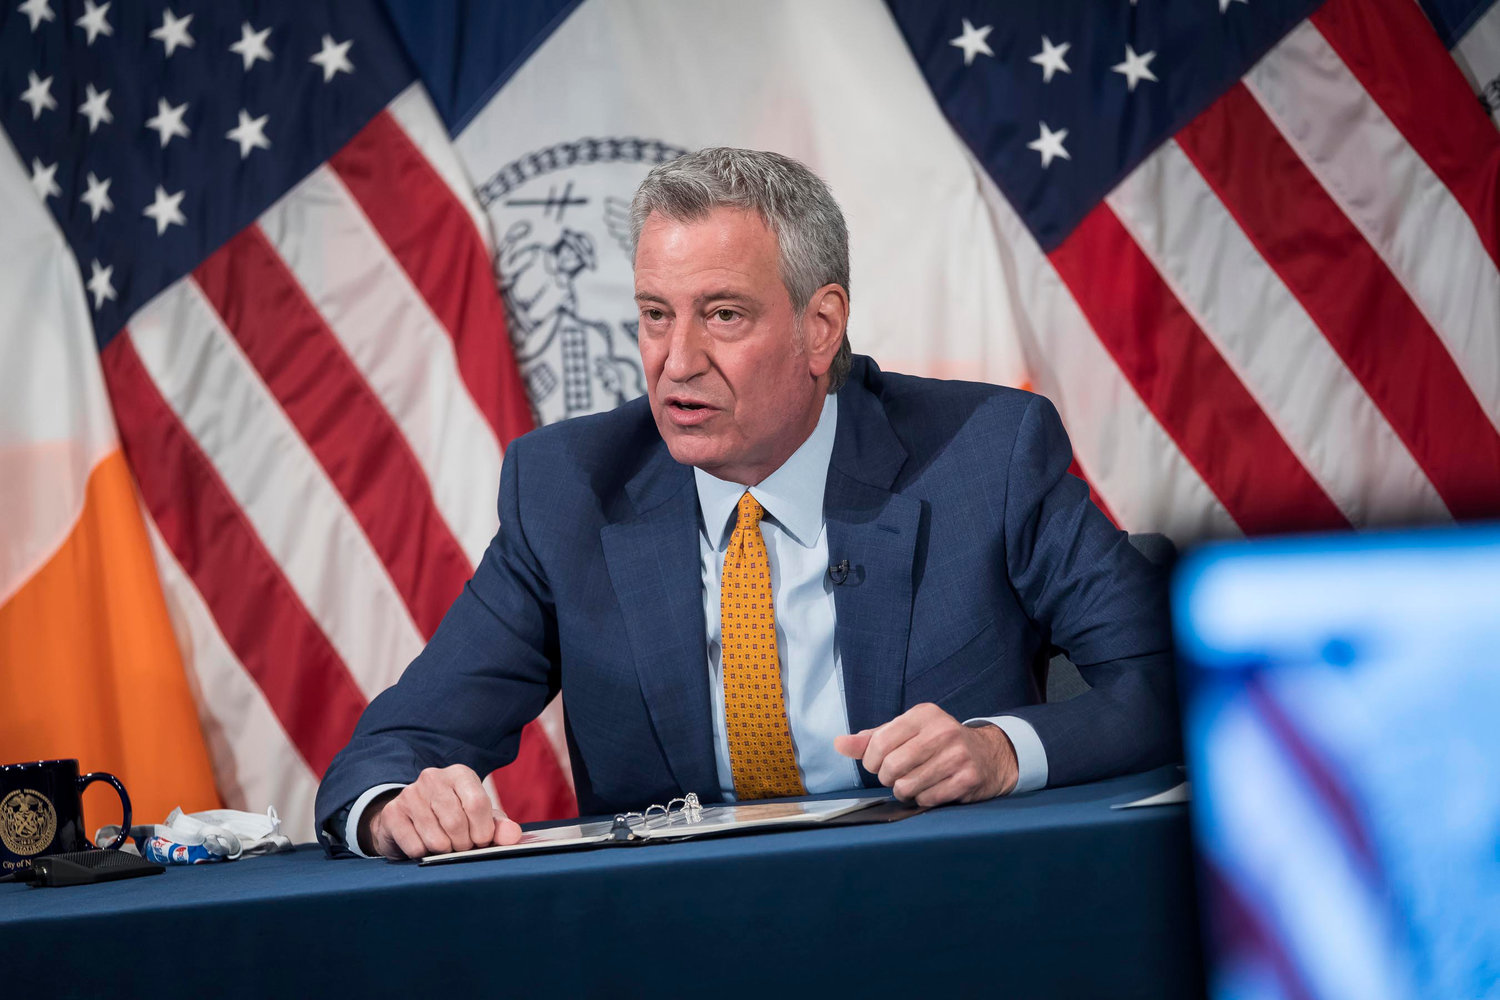 Mayor Bill de Blasio congratulated the city’s schools for vaccinating some 65,000 of the adults who work there. The city was able to relax school building closure policies, and now they will only need to close if there are four or more confirmed positive coronavirus cases in the building.